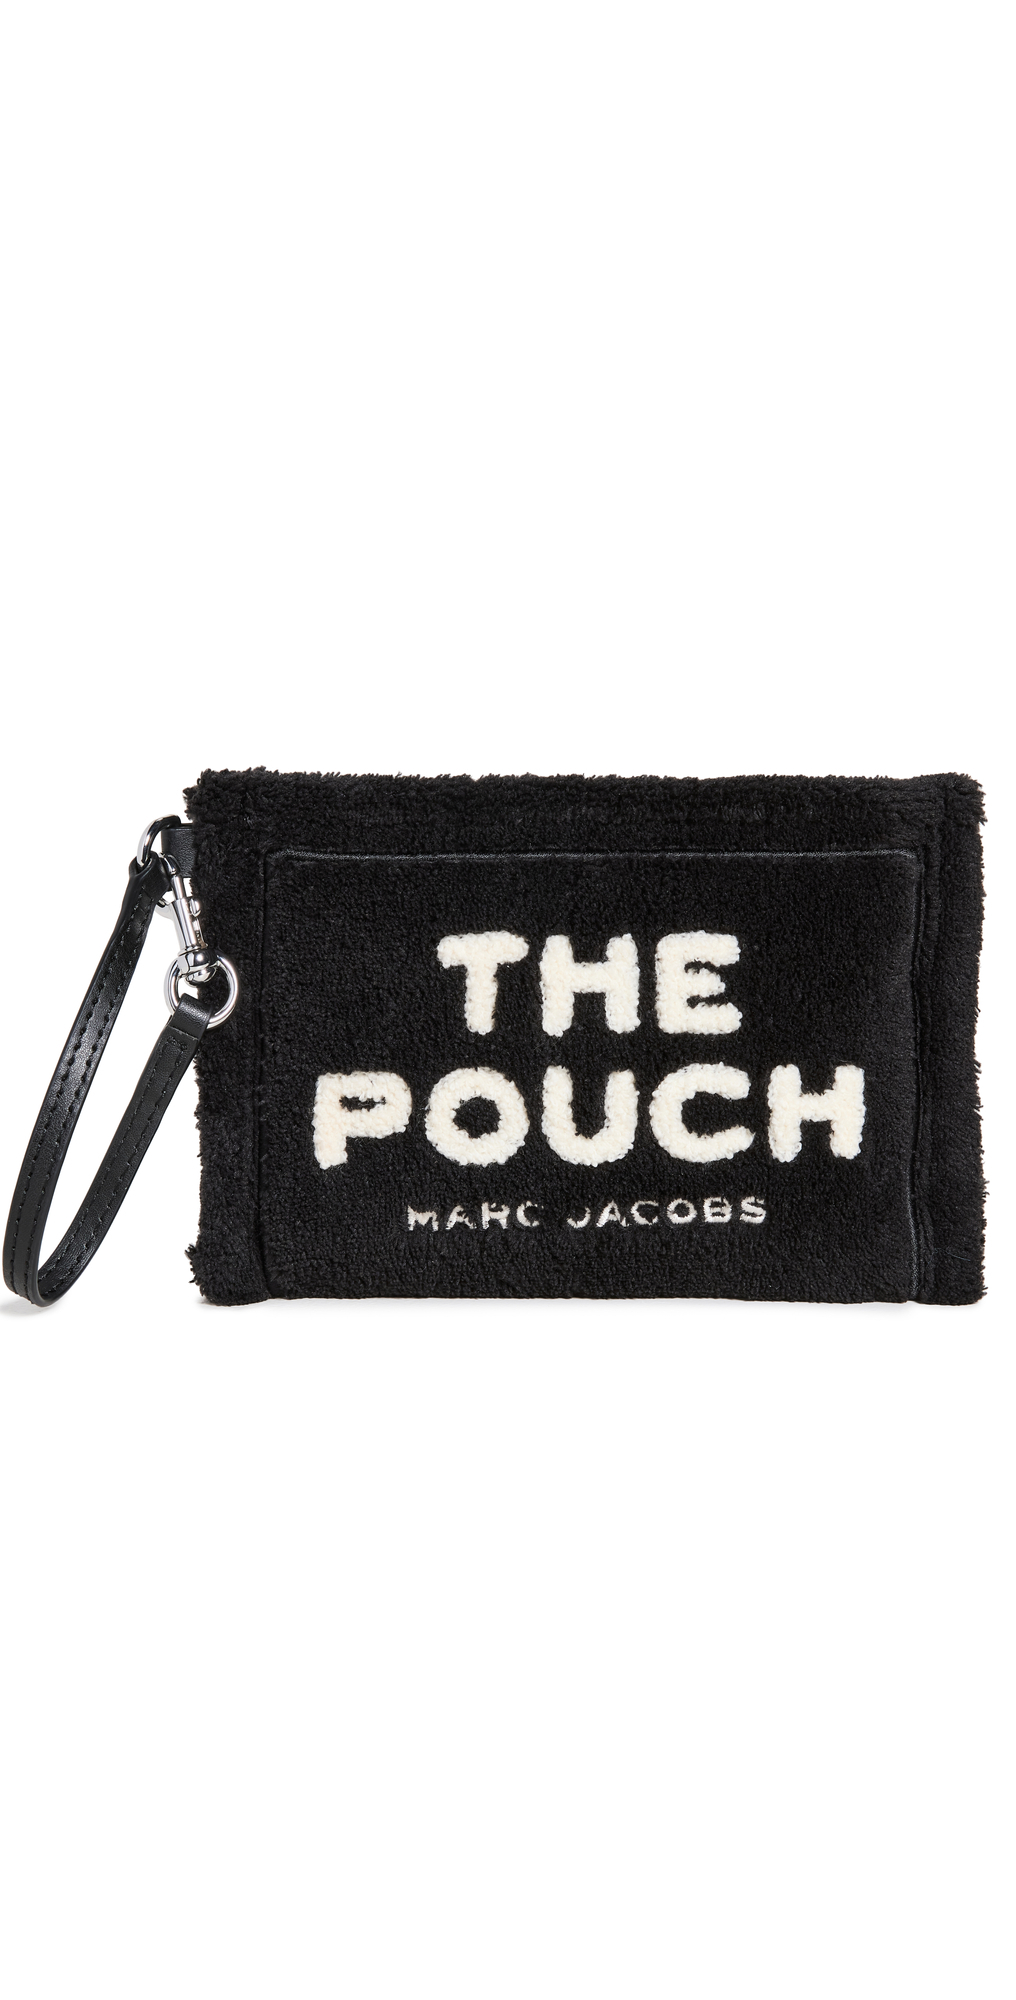 Marc Jacobs Terry Traveler Pouch in black